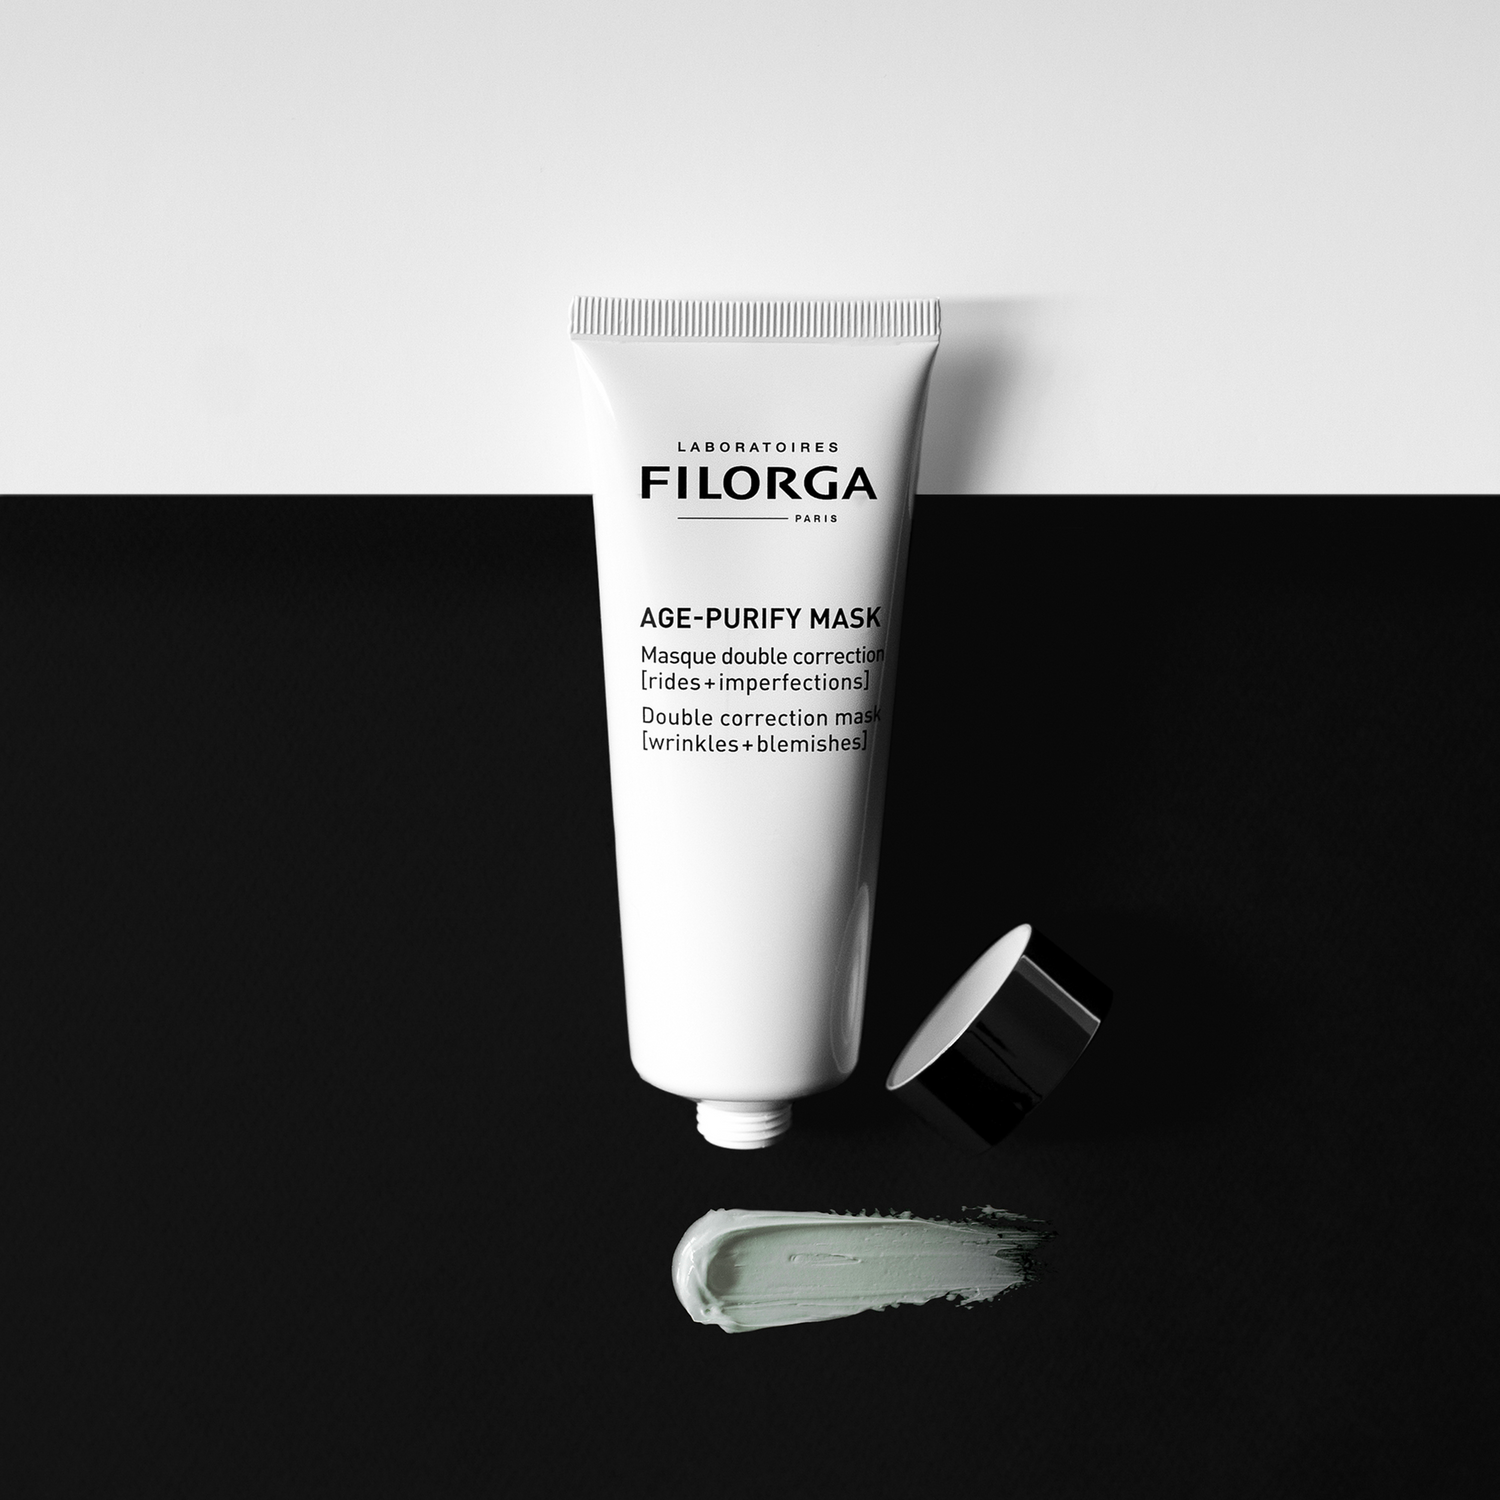 FILORGA AGE-PURIFY MASK opened tube with green cream-clay texture under it